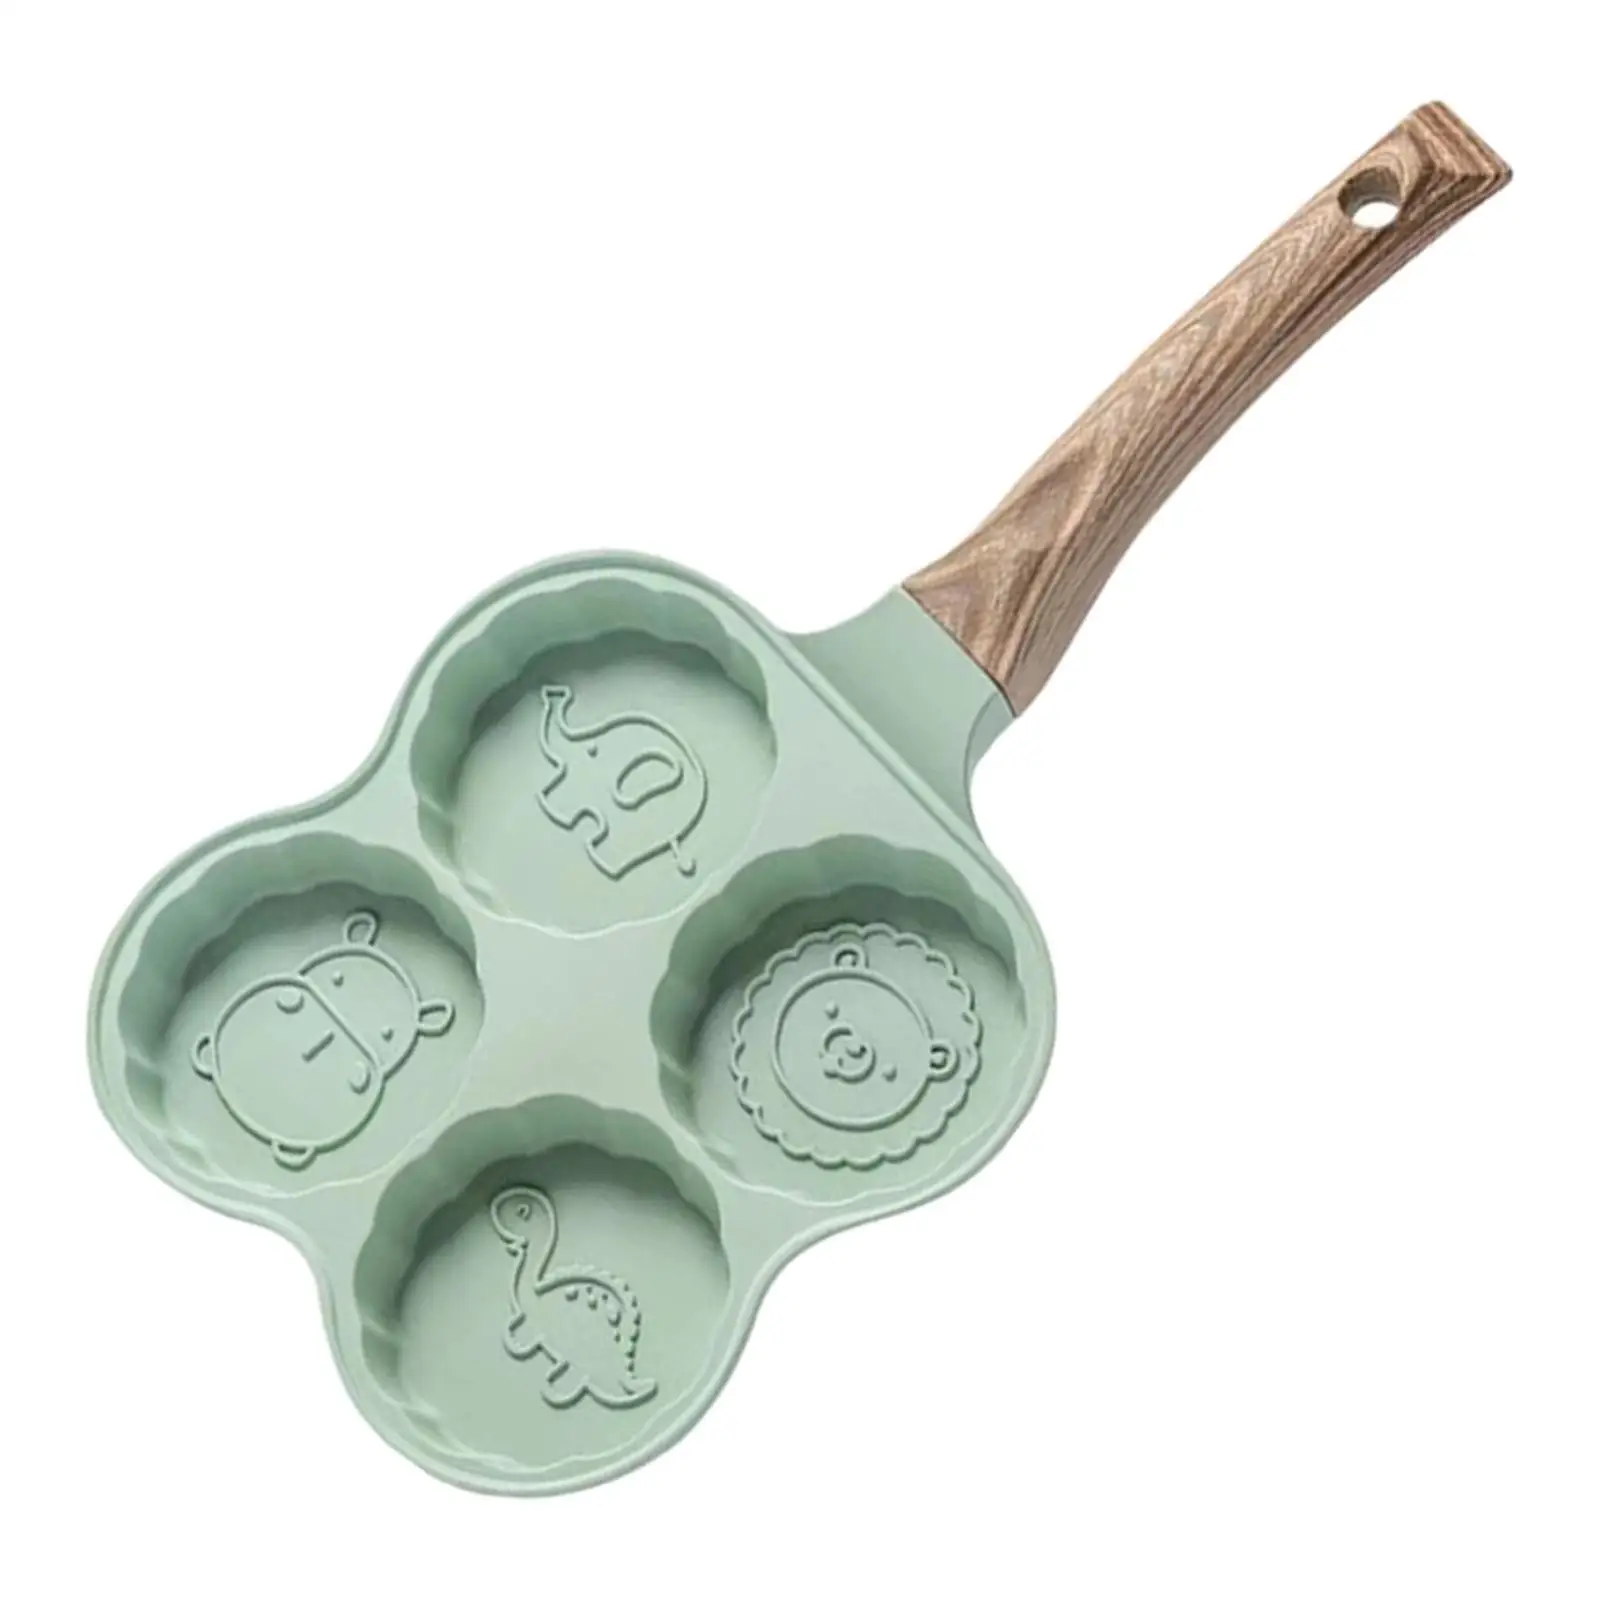 Egg Frying Pan Cookware Wooden Handle Egg Ham Pans Small Frying Pan for Cooking Household